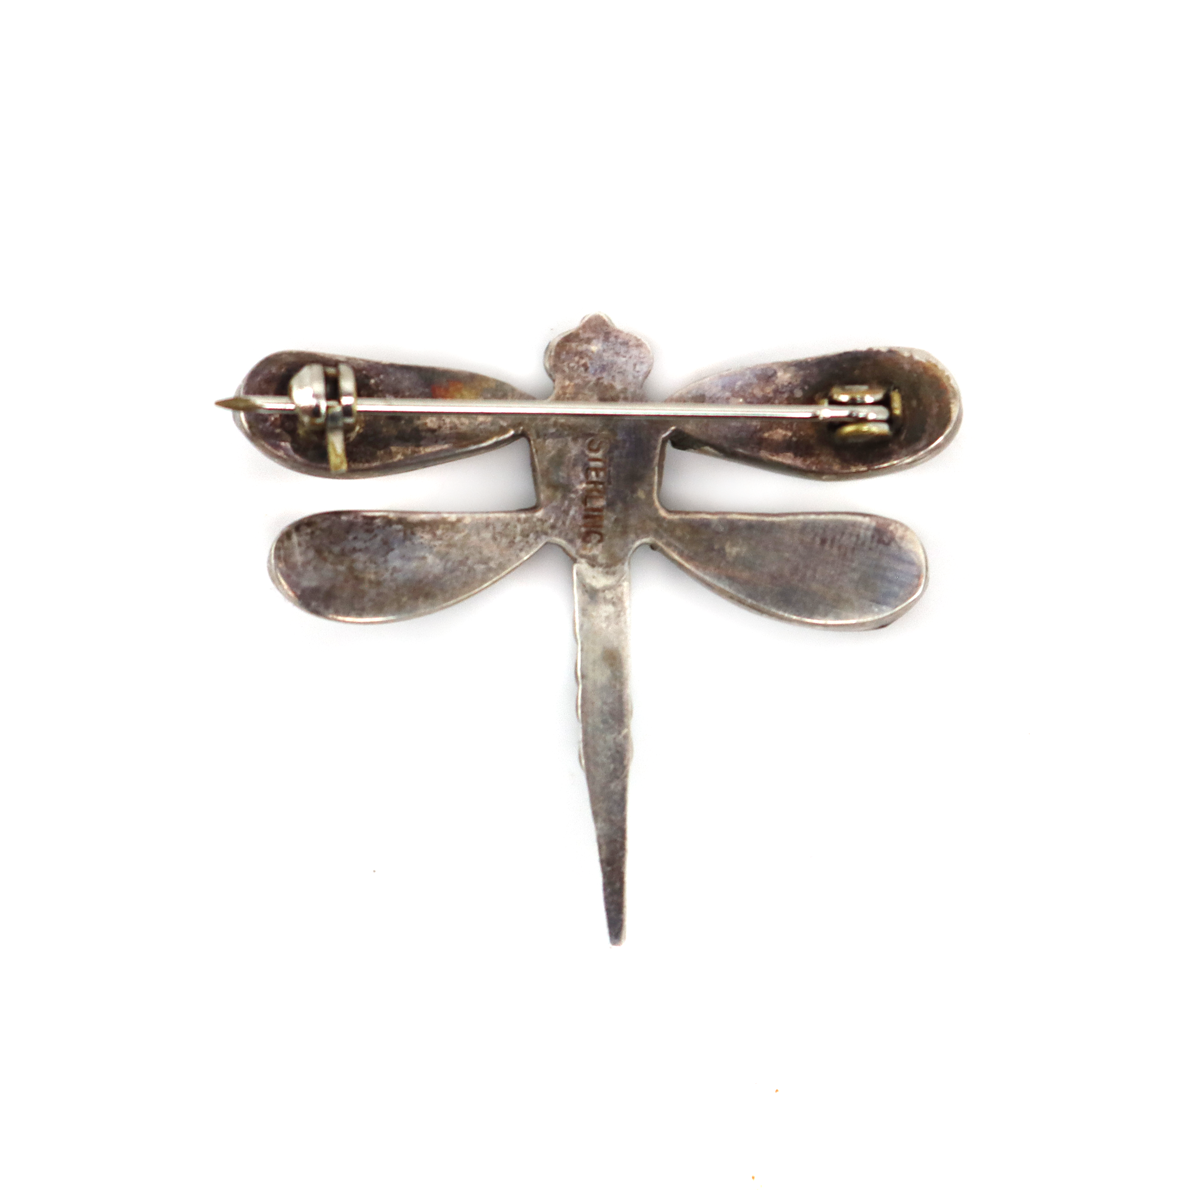 Zuni - Multi-Stone Inlay and Sterling Silver Dragonfly Pin c. 1960-70s, 1.25" x 1.5" (J16108)